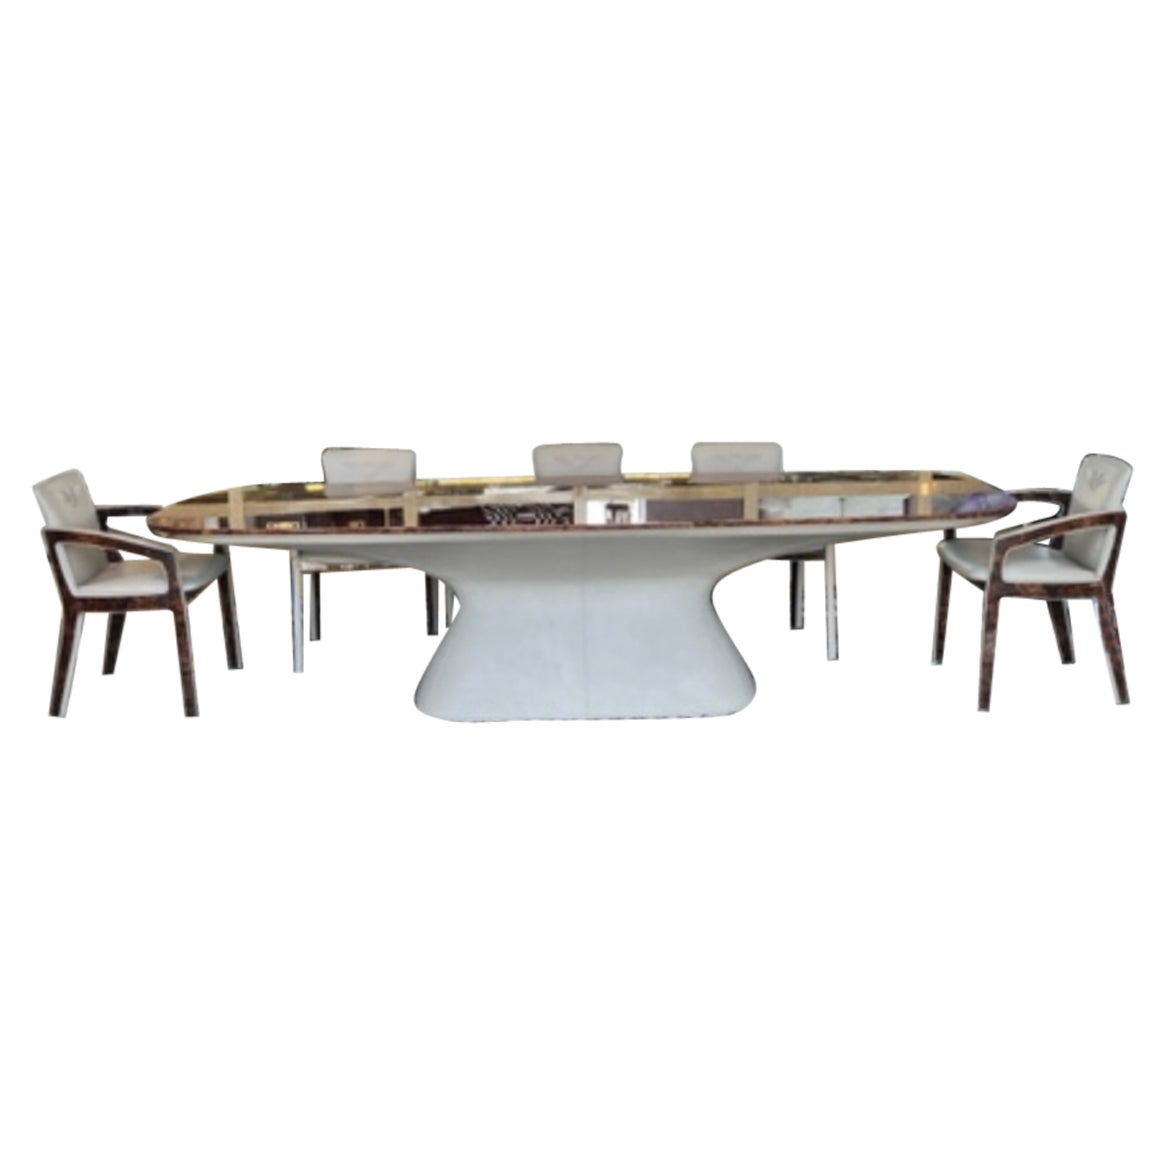 Bentley Home Walnut Burl and Leather Dining Table and Chairs